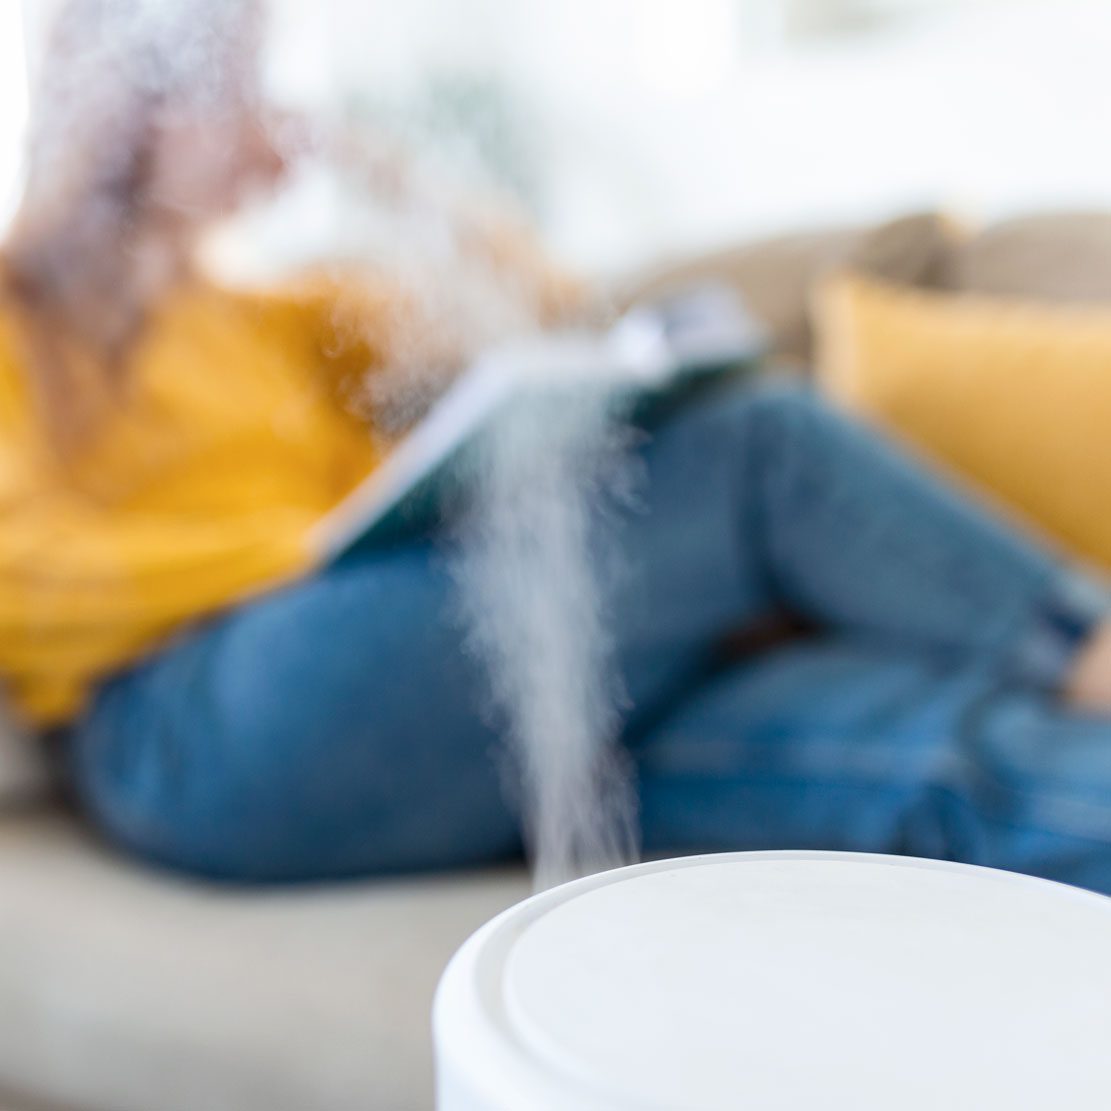 What is Indoor Air Quality?